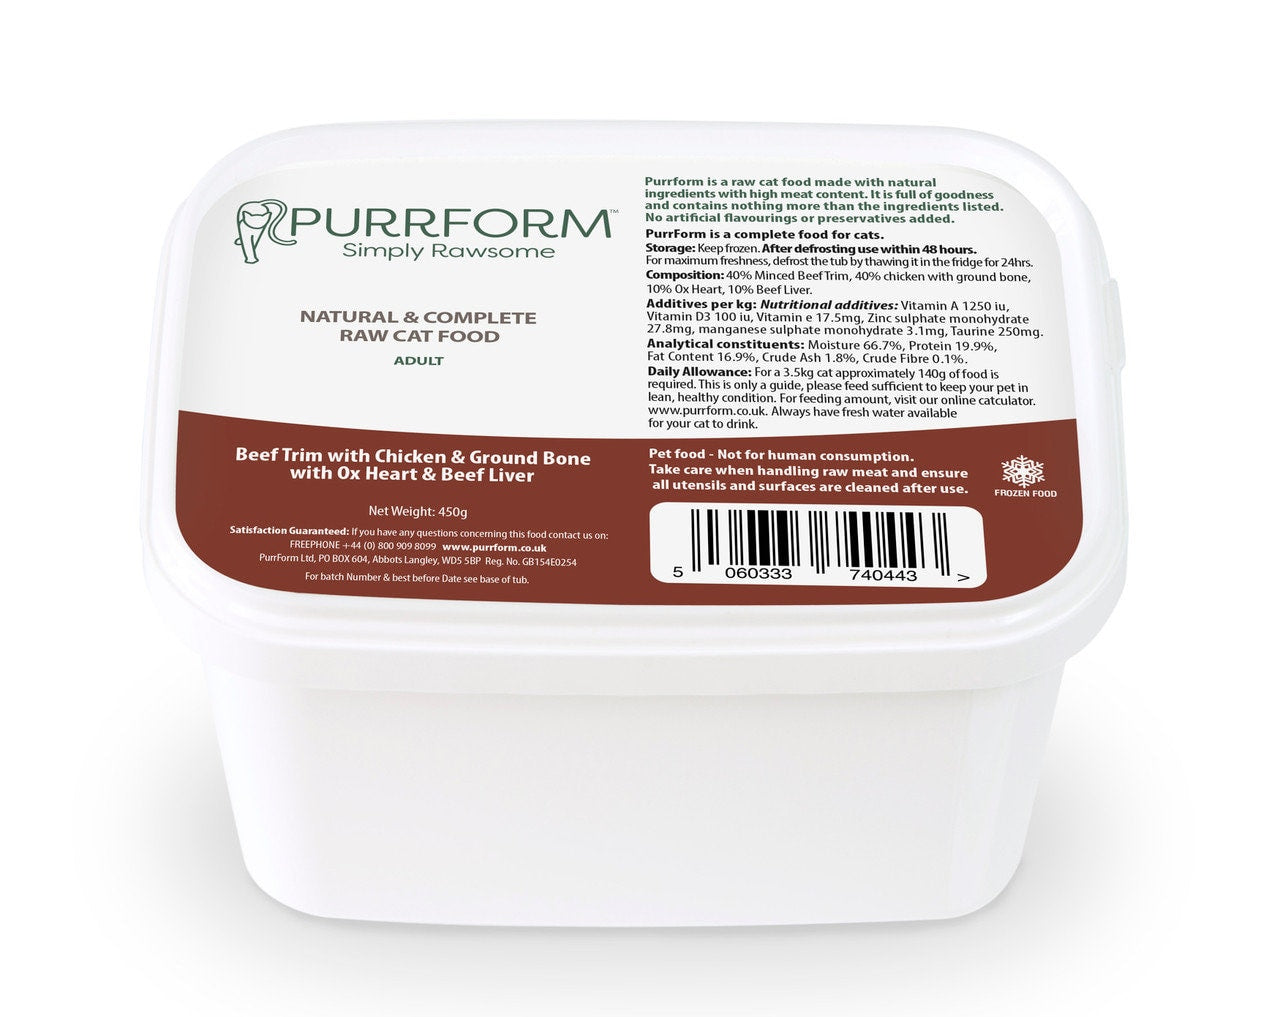 Cat Premium Organic Raw Food 10 Tubs of Purrform Farmed Beef Trim with Chicken & Ground Bone with Ox Heart plus Beef Liver